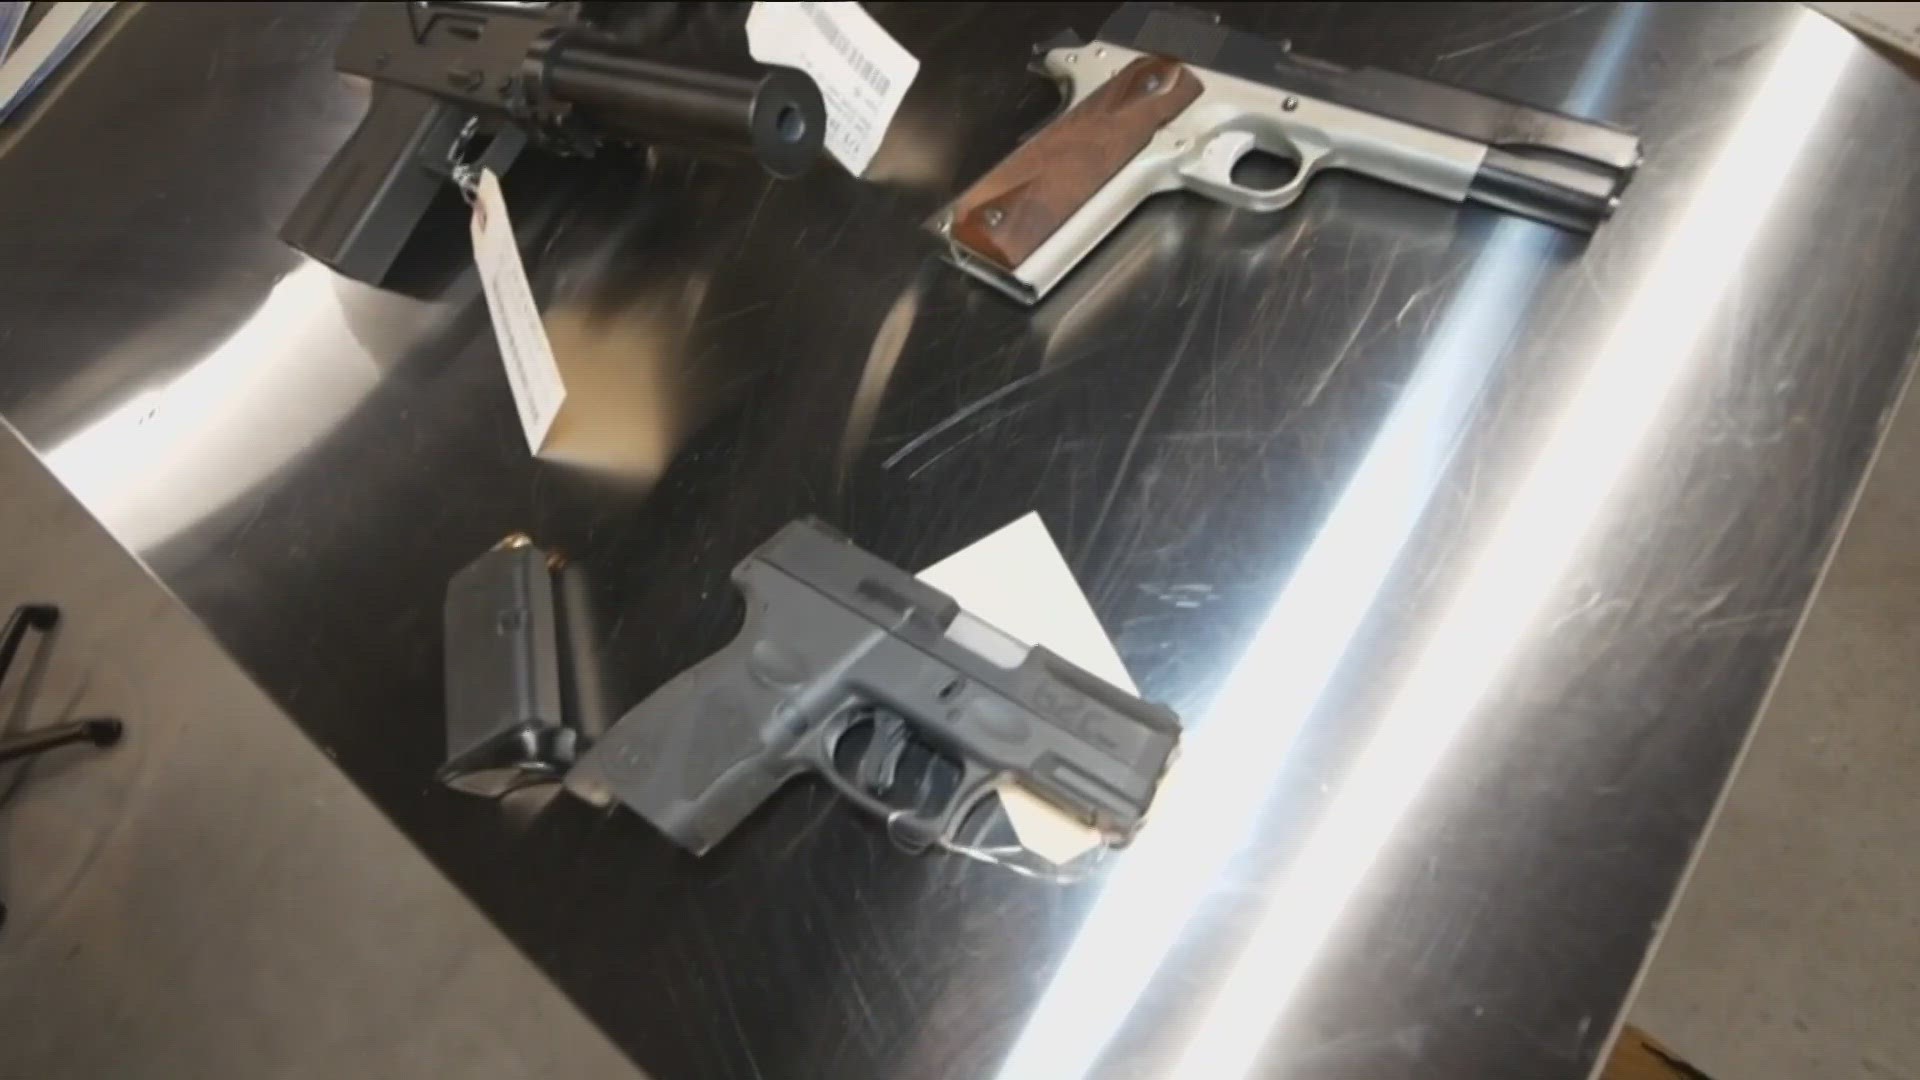 Ohio ATF agent Daryl McCormick traces the origins of guns used in crimes. He says criminals usually get those guns by one of two methods, or a troubling alternative.